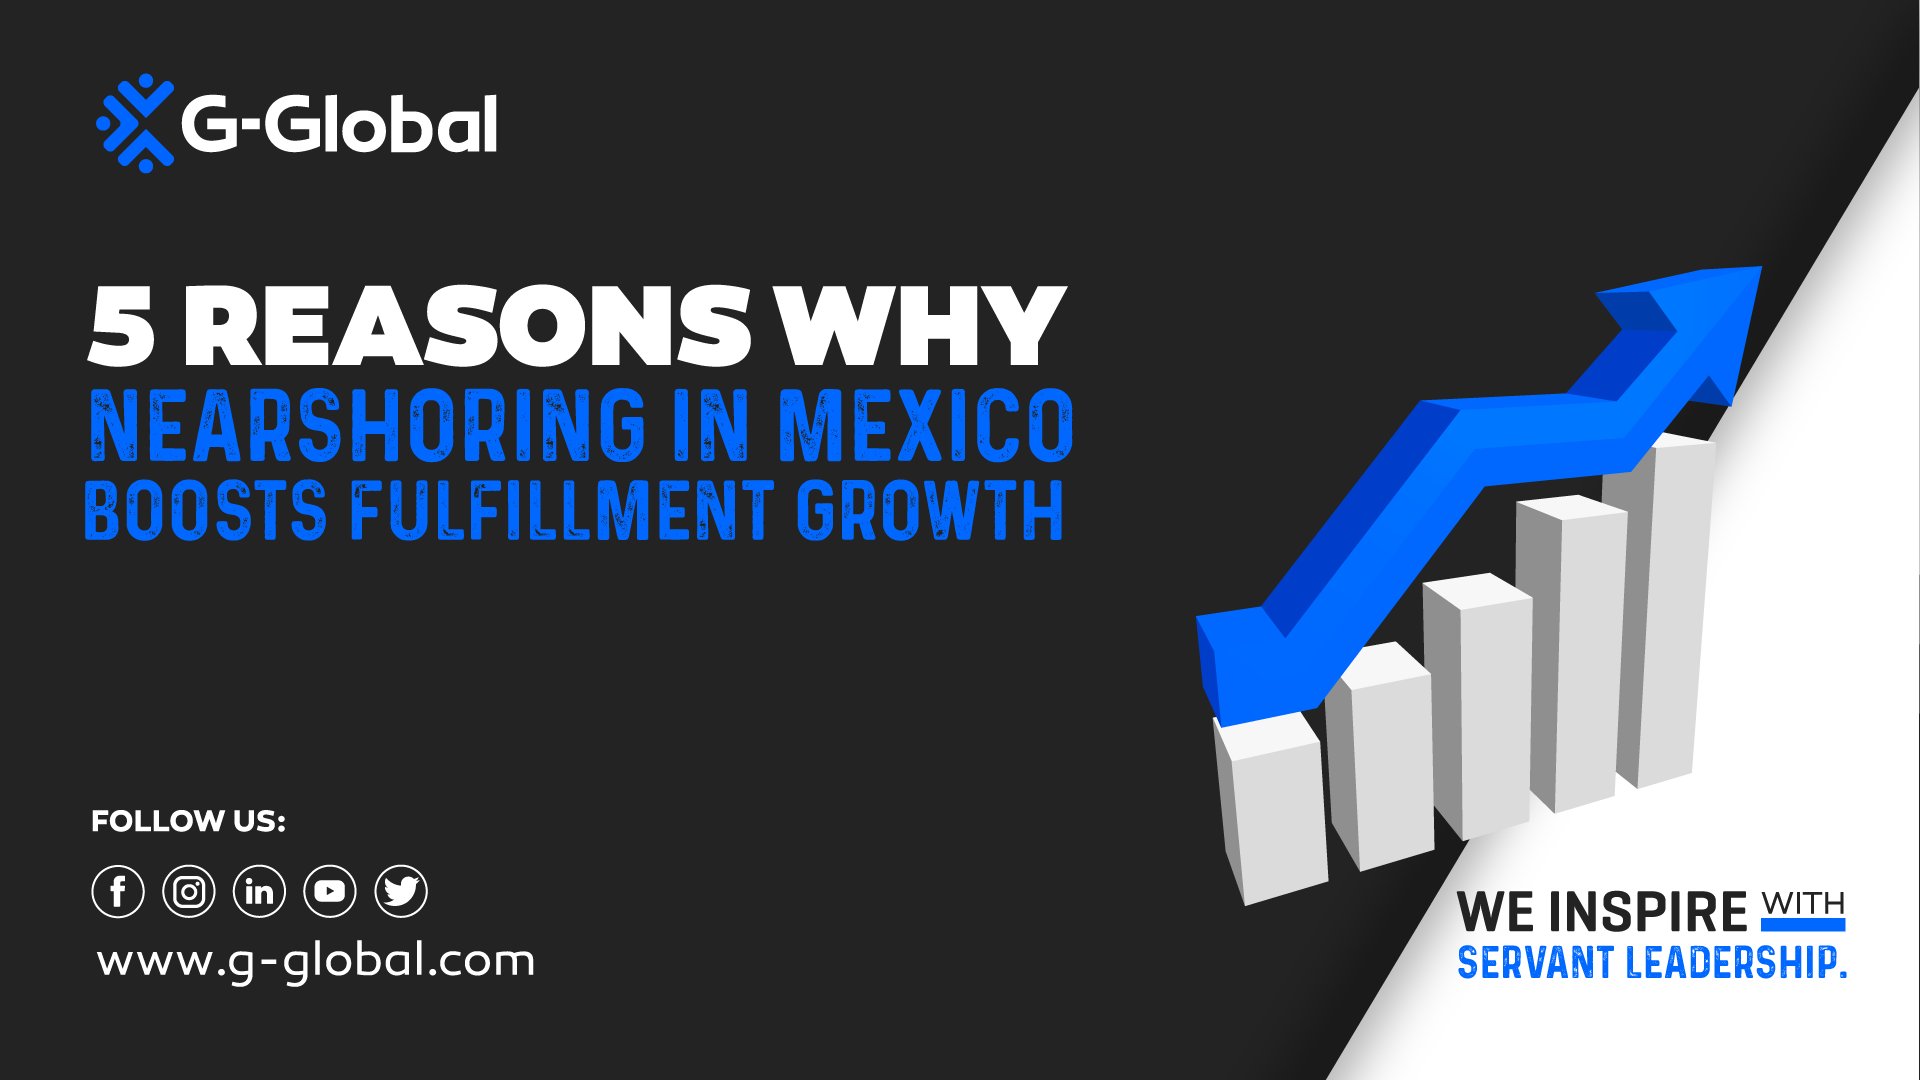  5 Reasons why Nearshoring in Mexico boosts Fulfillment Growth